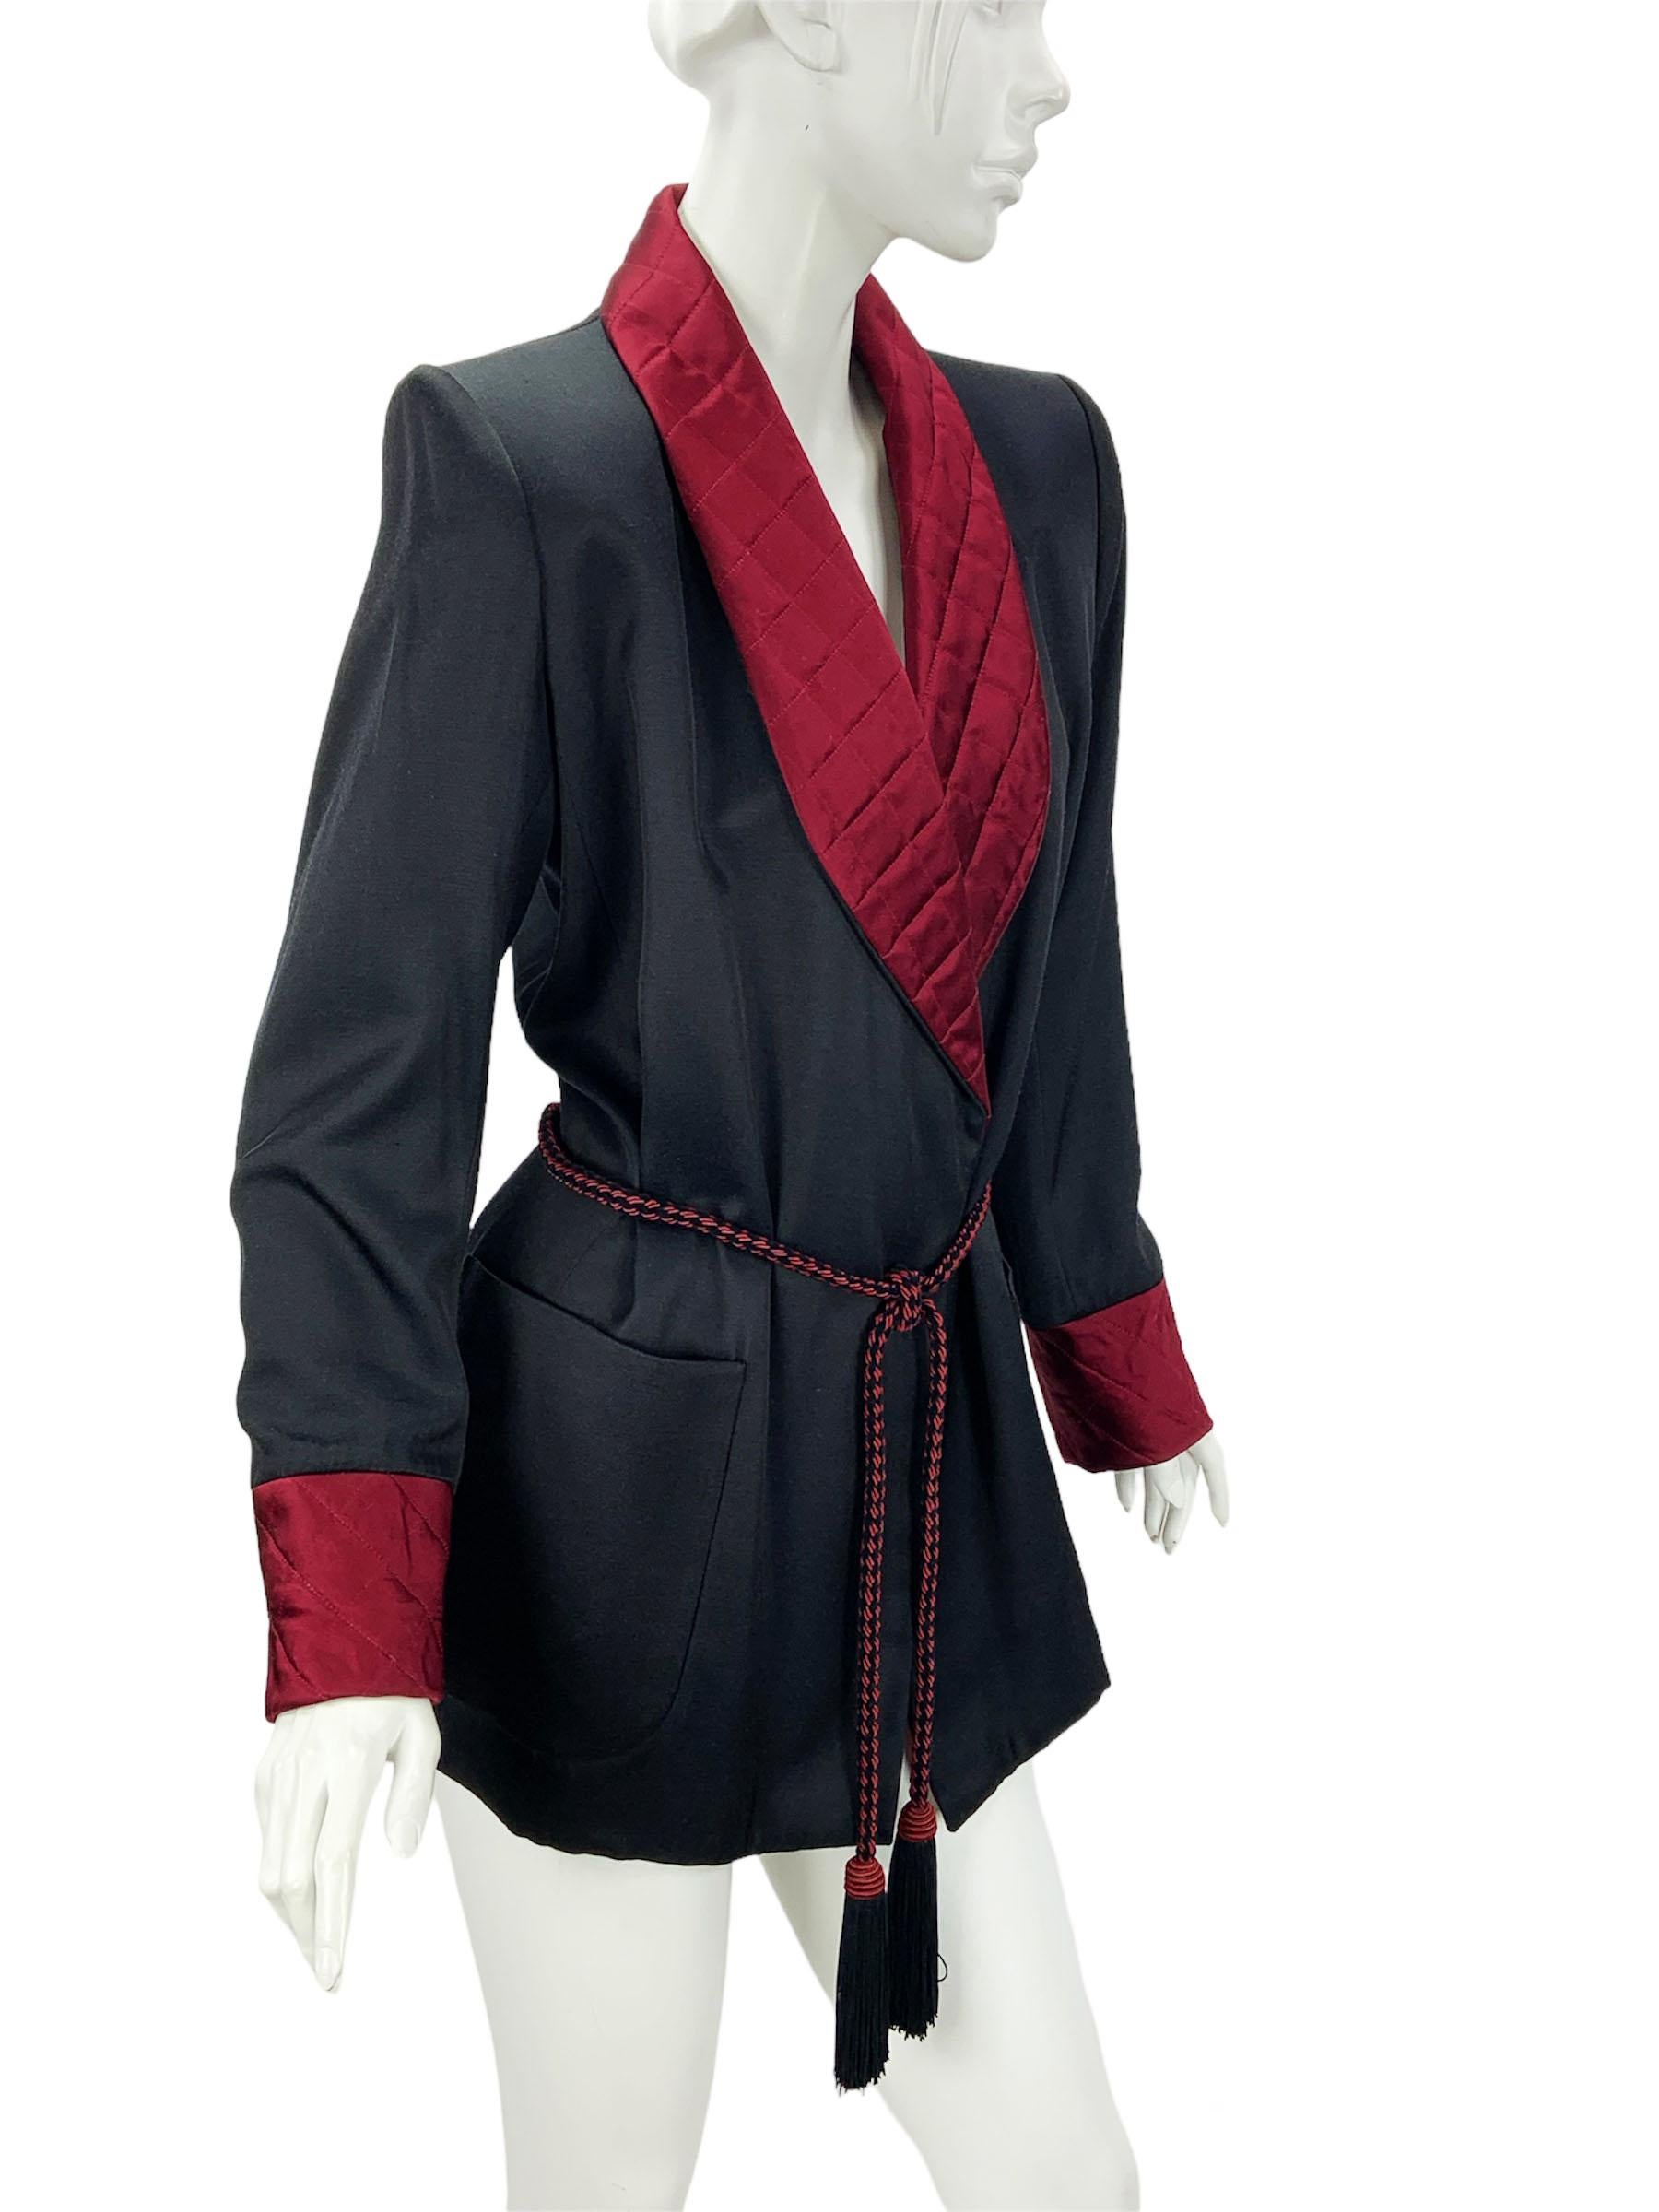 Vintage 80's Yves Saint Laurent Rive Gauche Le Smoking Jacket
French size - 38 
Black with burgundy quilted shawl lapel and cuffs, Two deep pockets, Twisted rope belt with tassels.
43% silk, 40% wool, 17% rayon. Fully lined. Belt closure. Padded